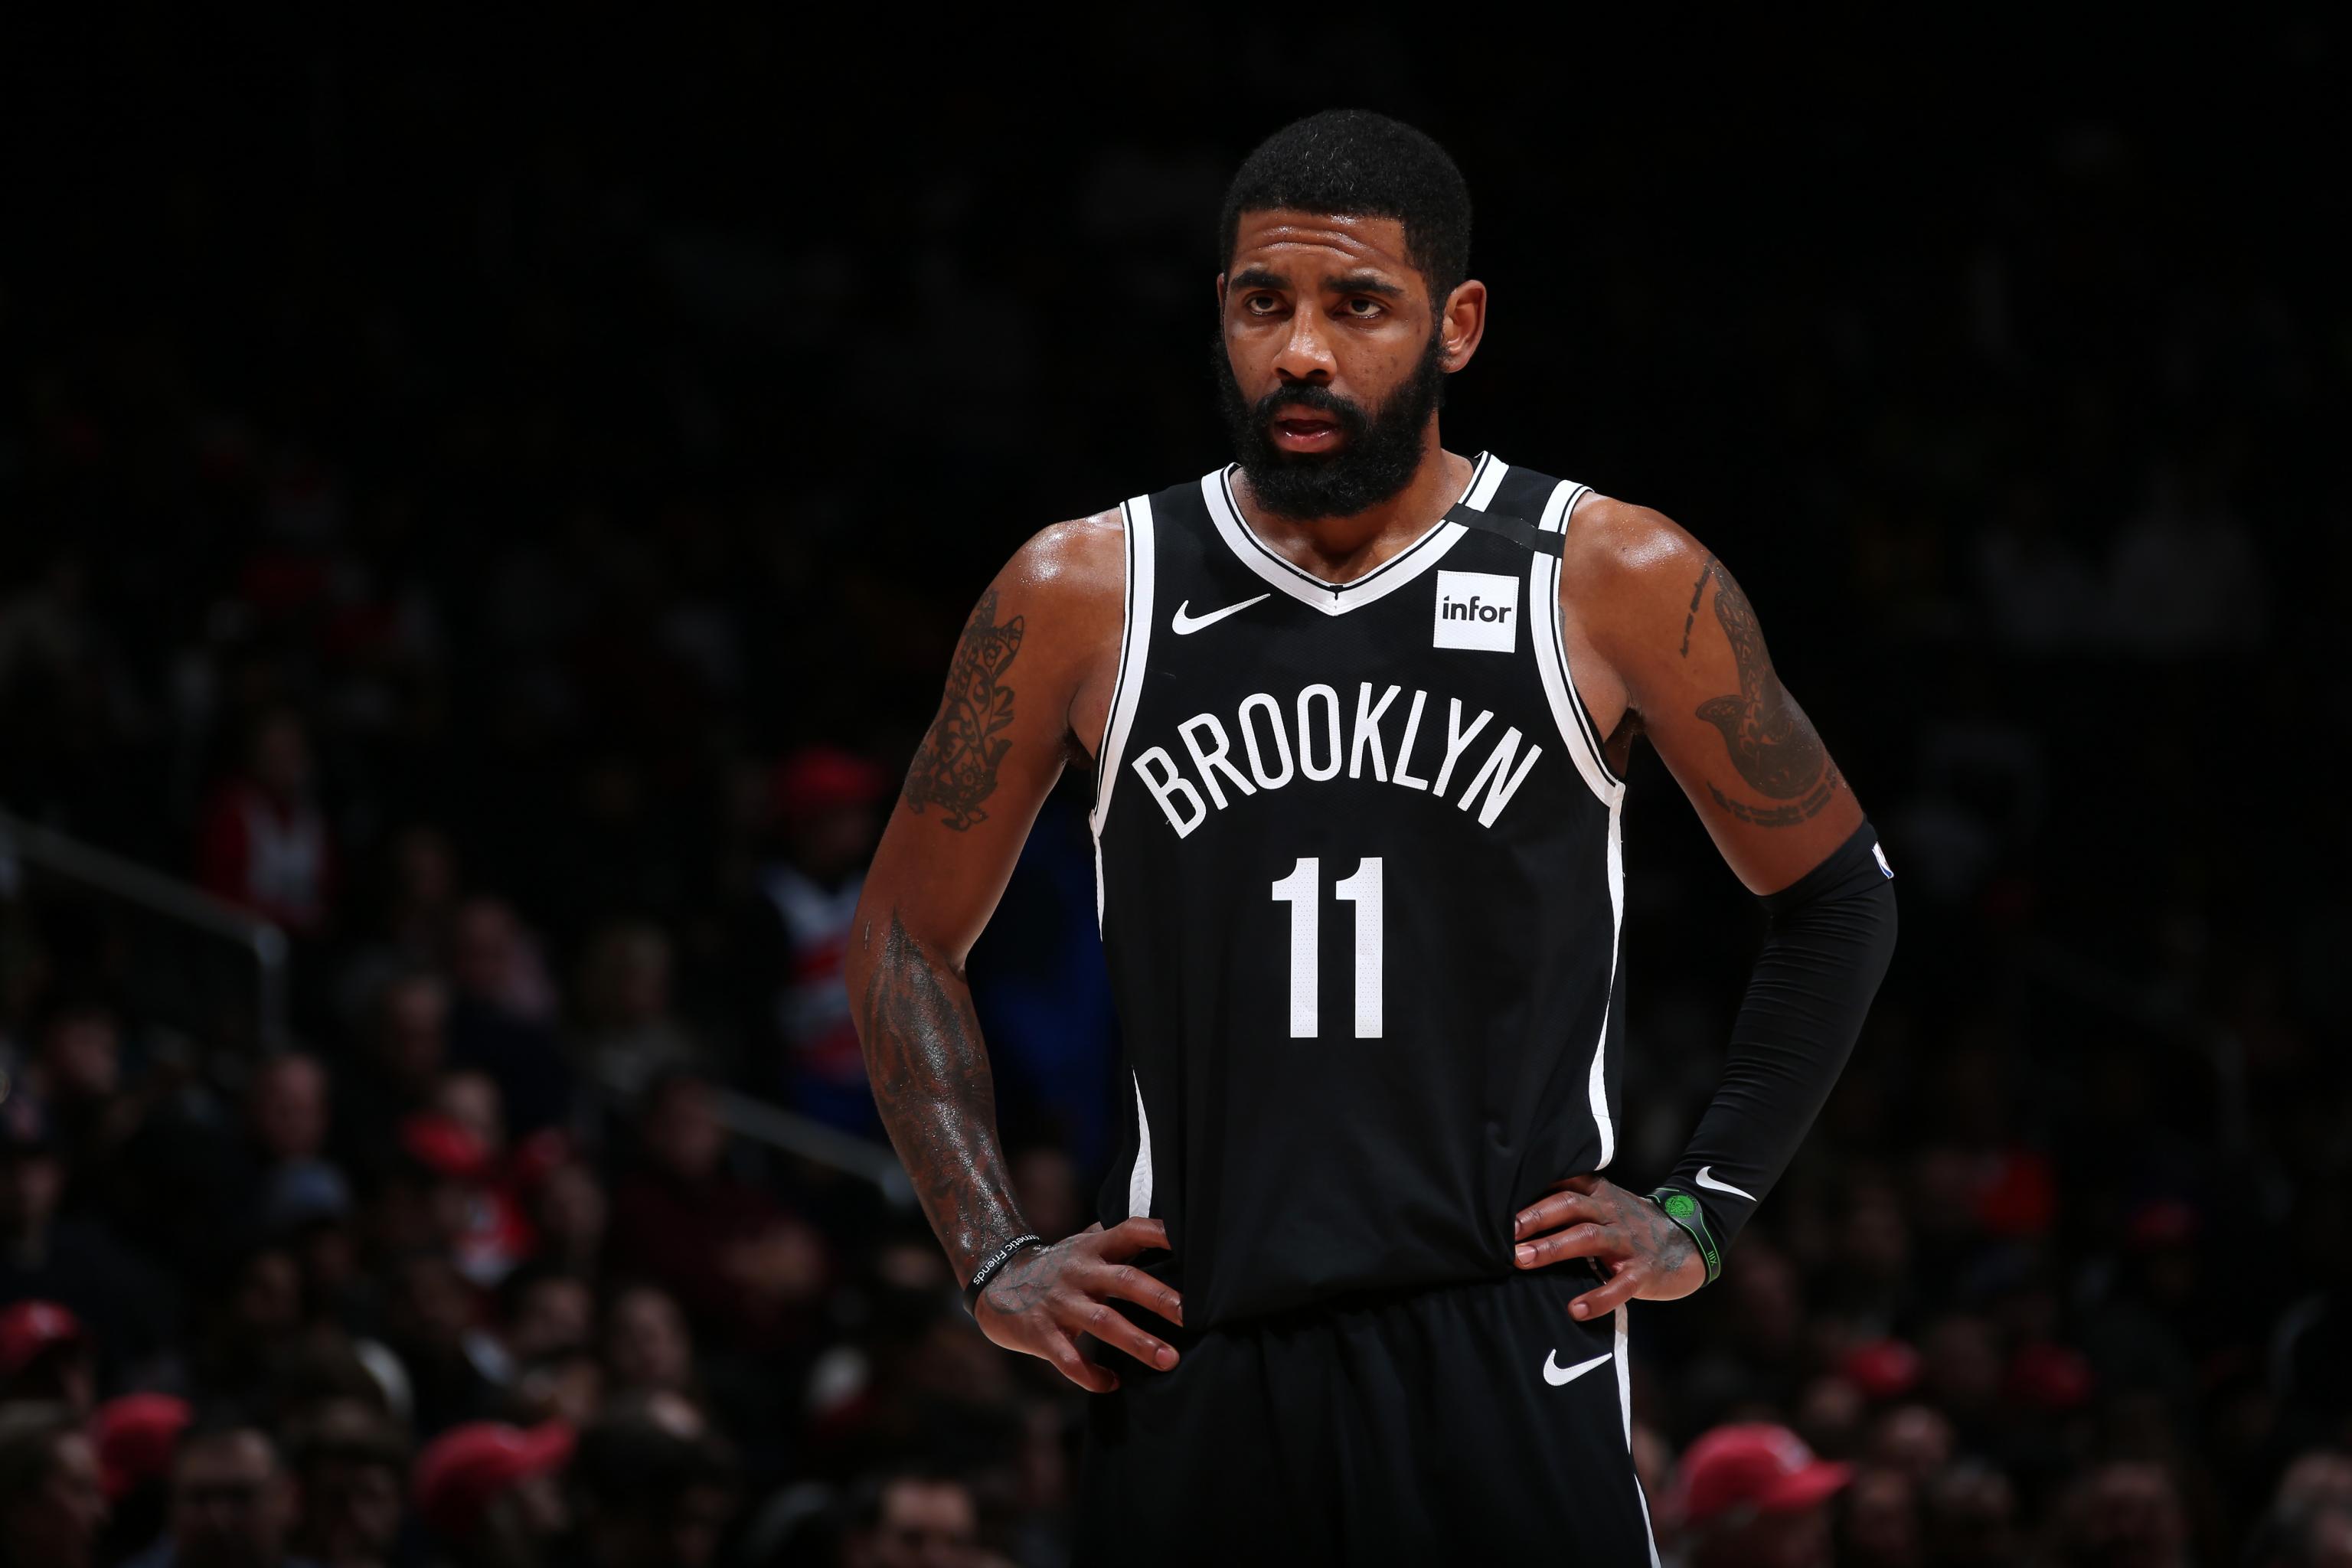 Nets' Kyrie Irving signs fan's jersey salvaged from fire - ESPN